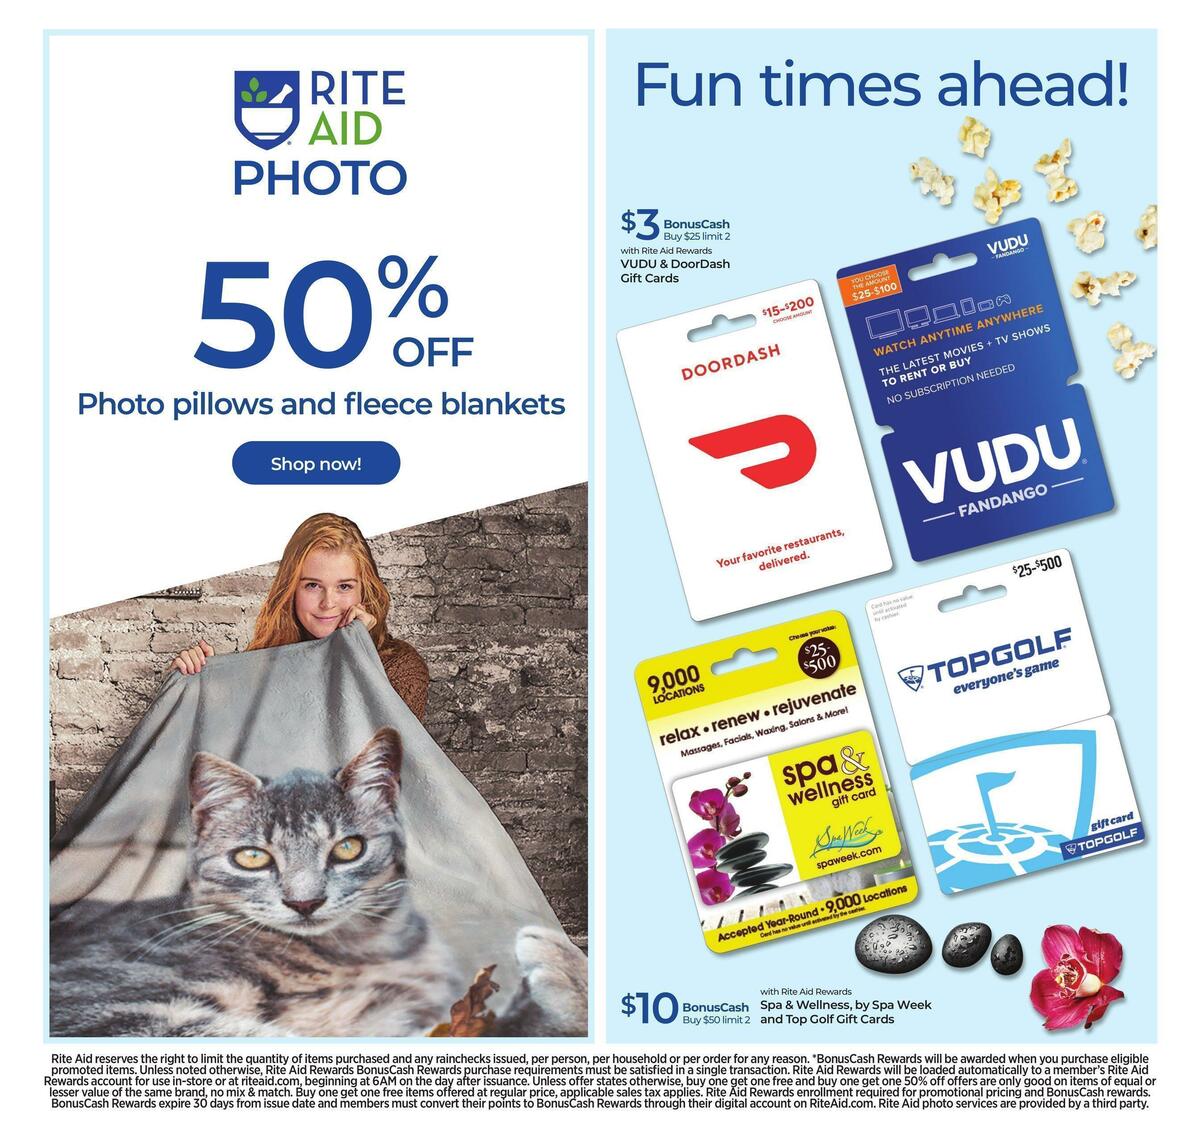 Rite Aid Weekly Ad from September 25